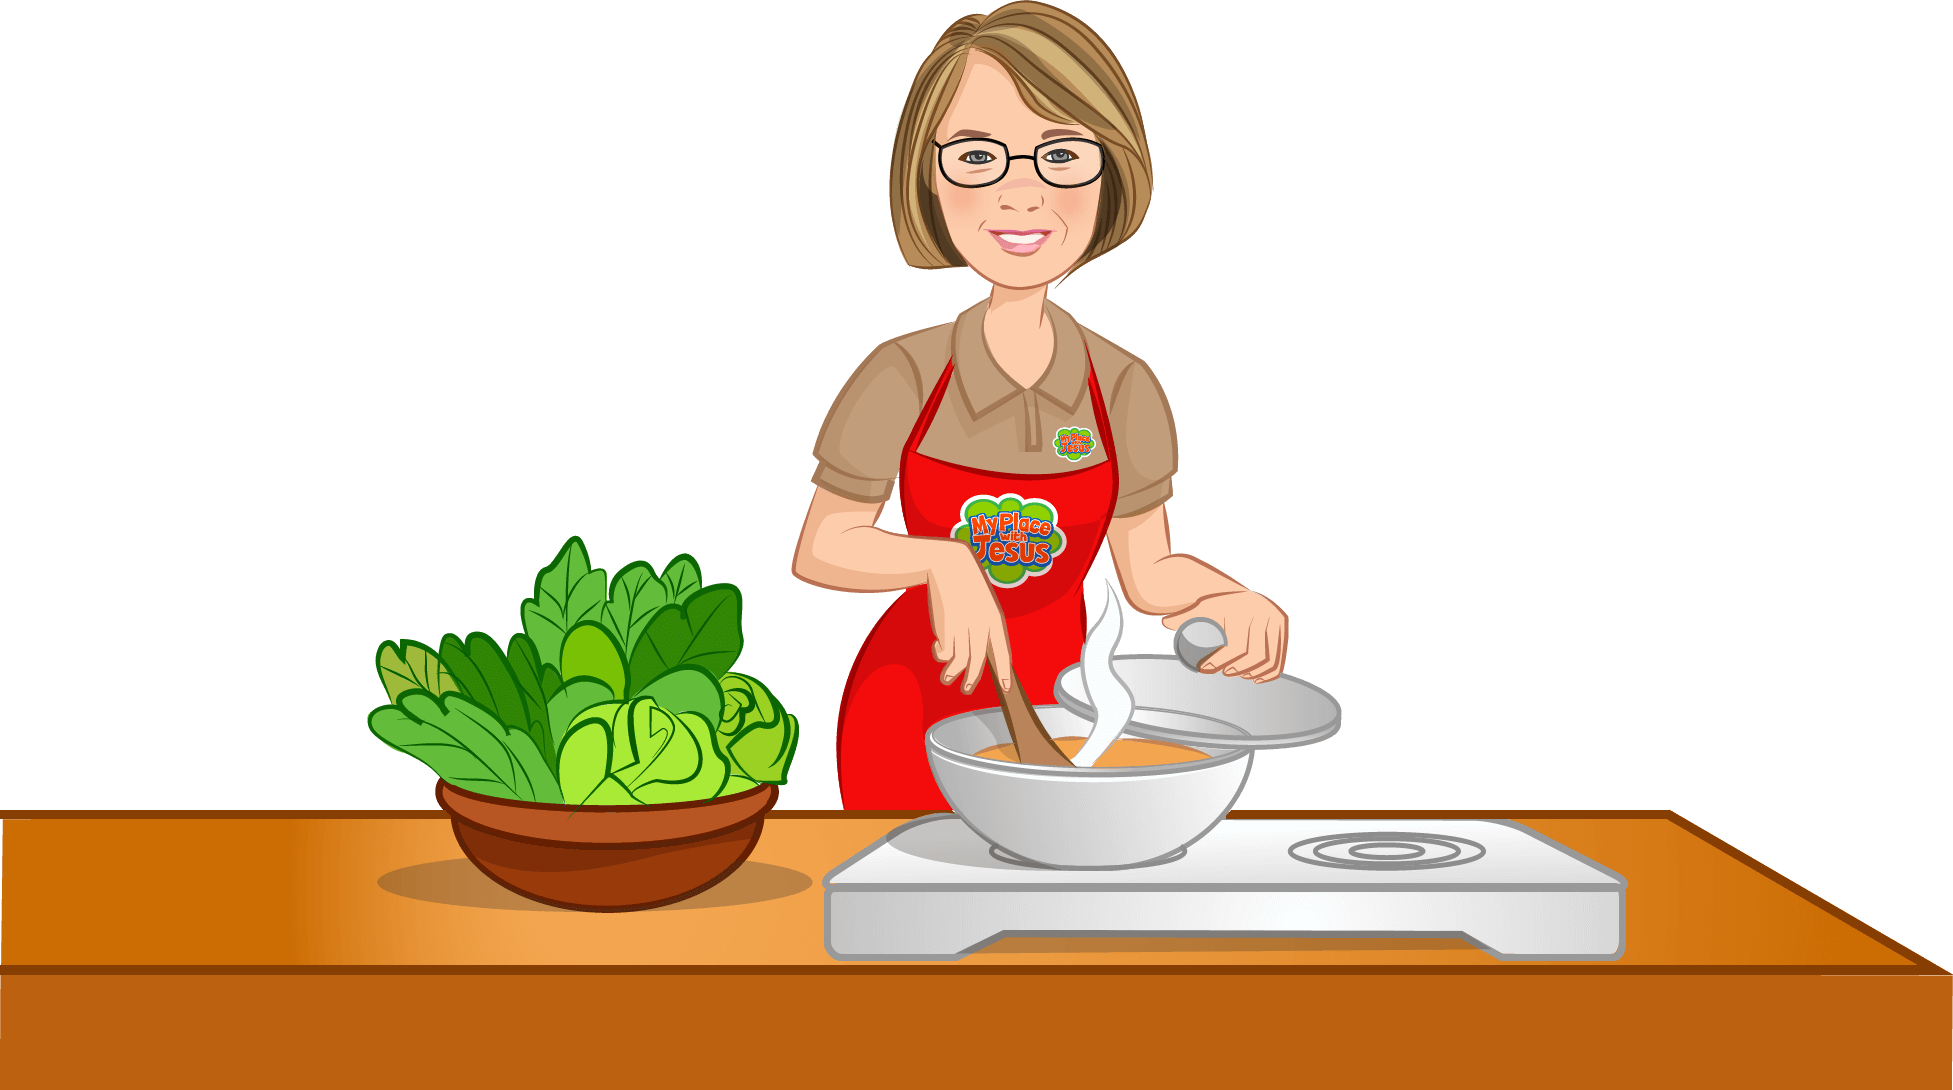 Ms Melissa, a blonde woman wearing glasses, a tan polo shirt, black skirt, red apron standing at a stove cooking something in a silver pan, with a brown bowl full of green lettuce sitting on the counter next to her